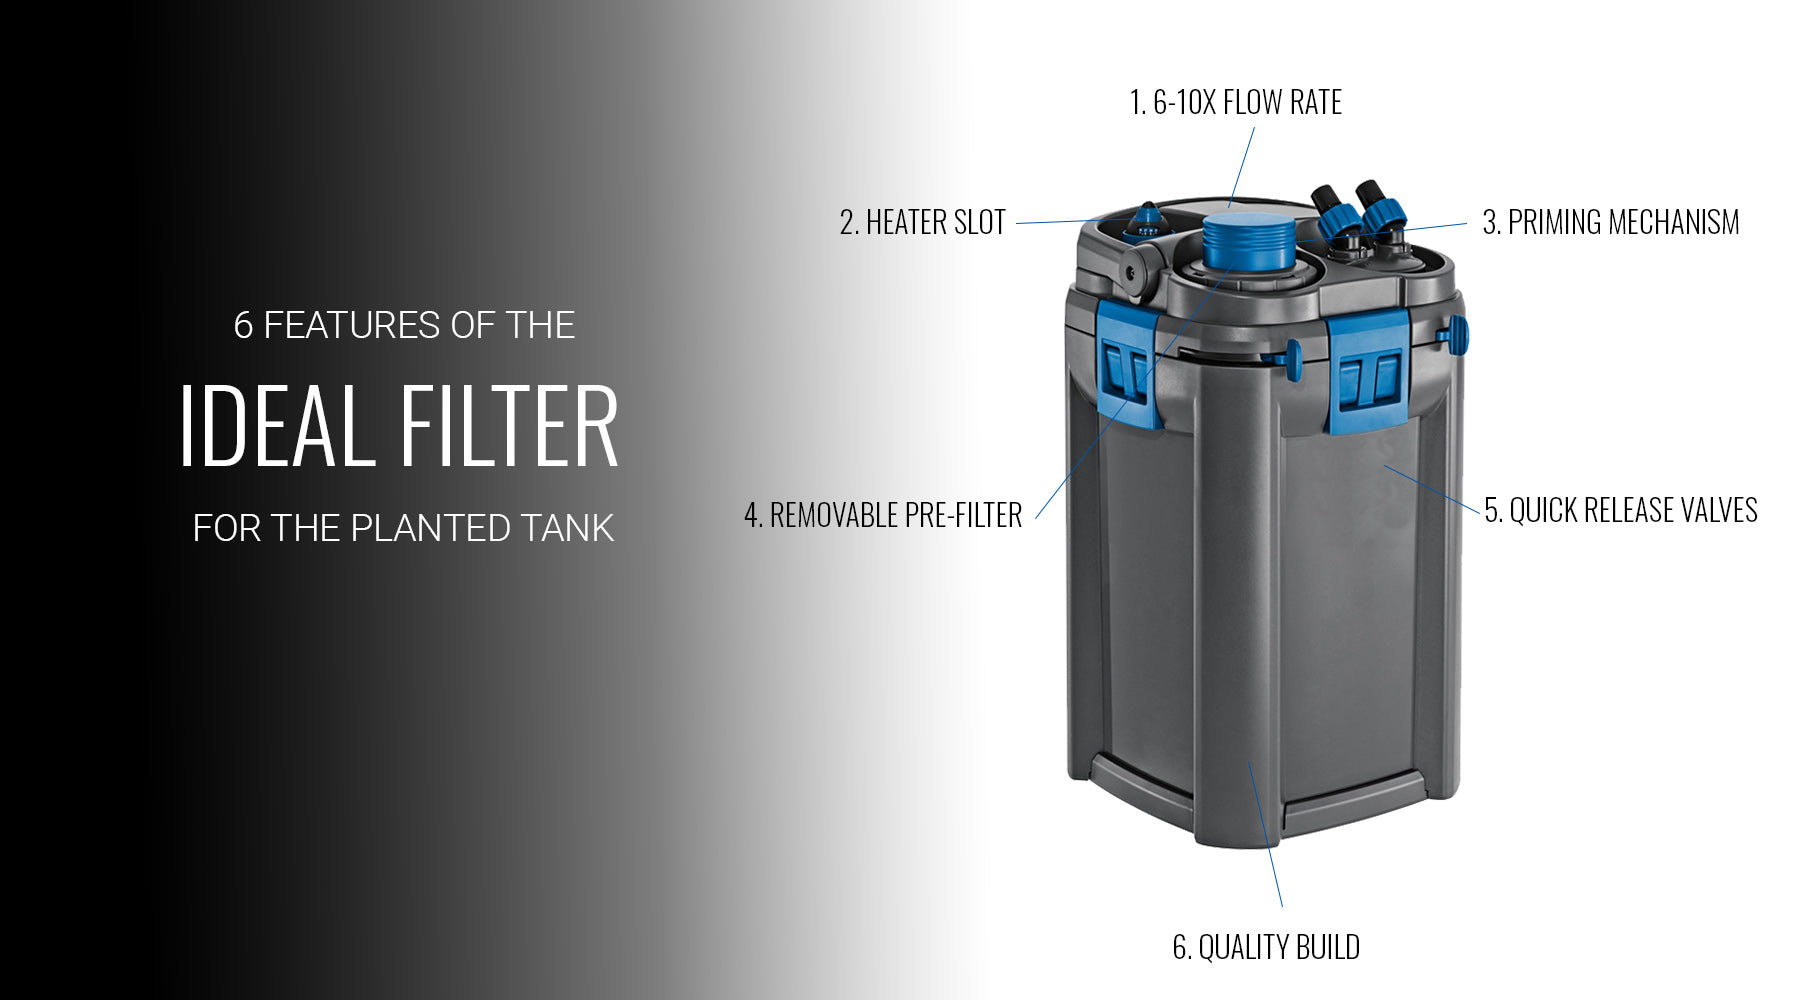 6 features of an ideal planted tank filter